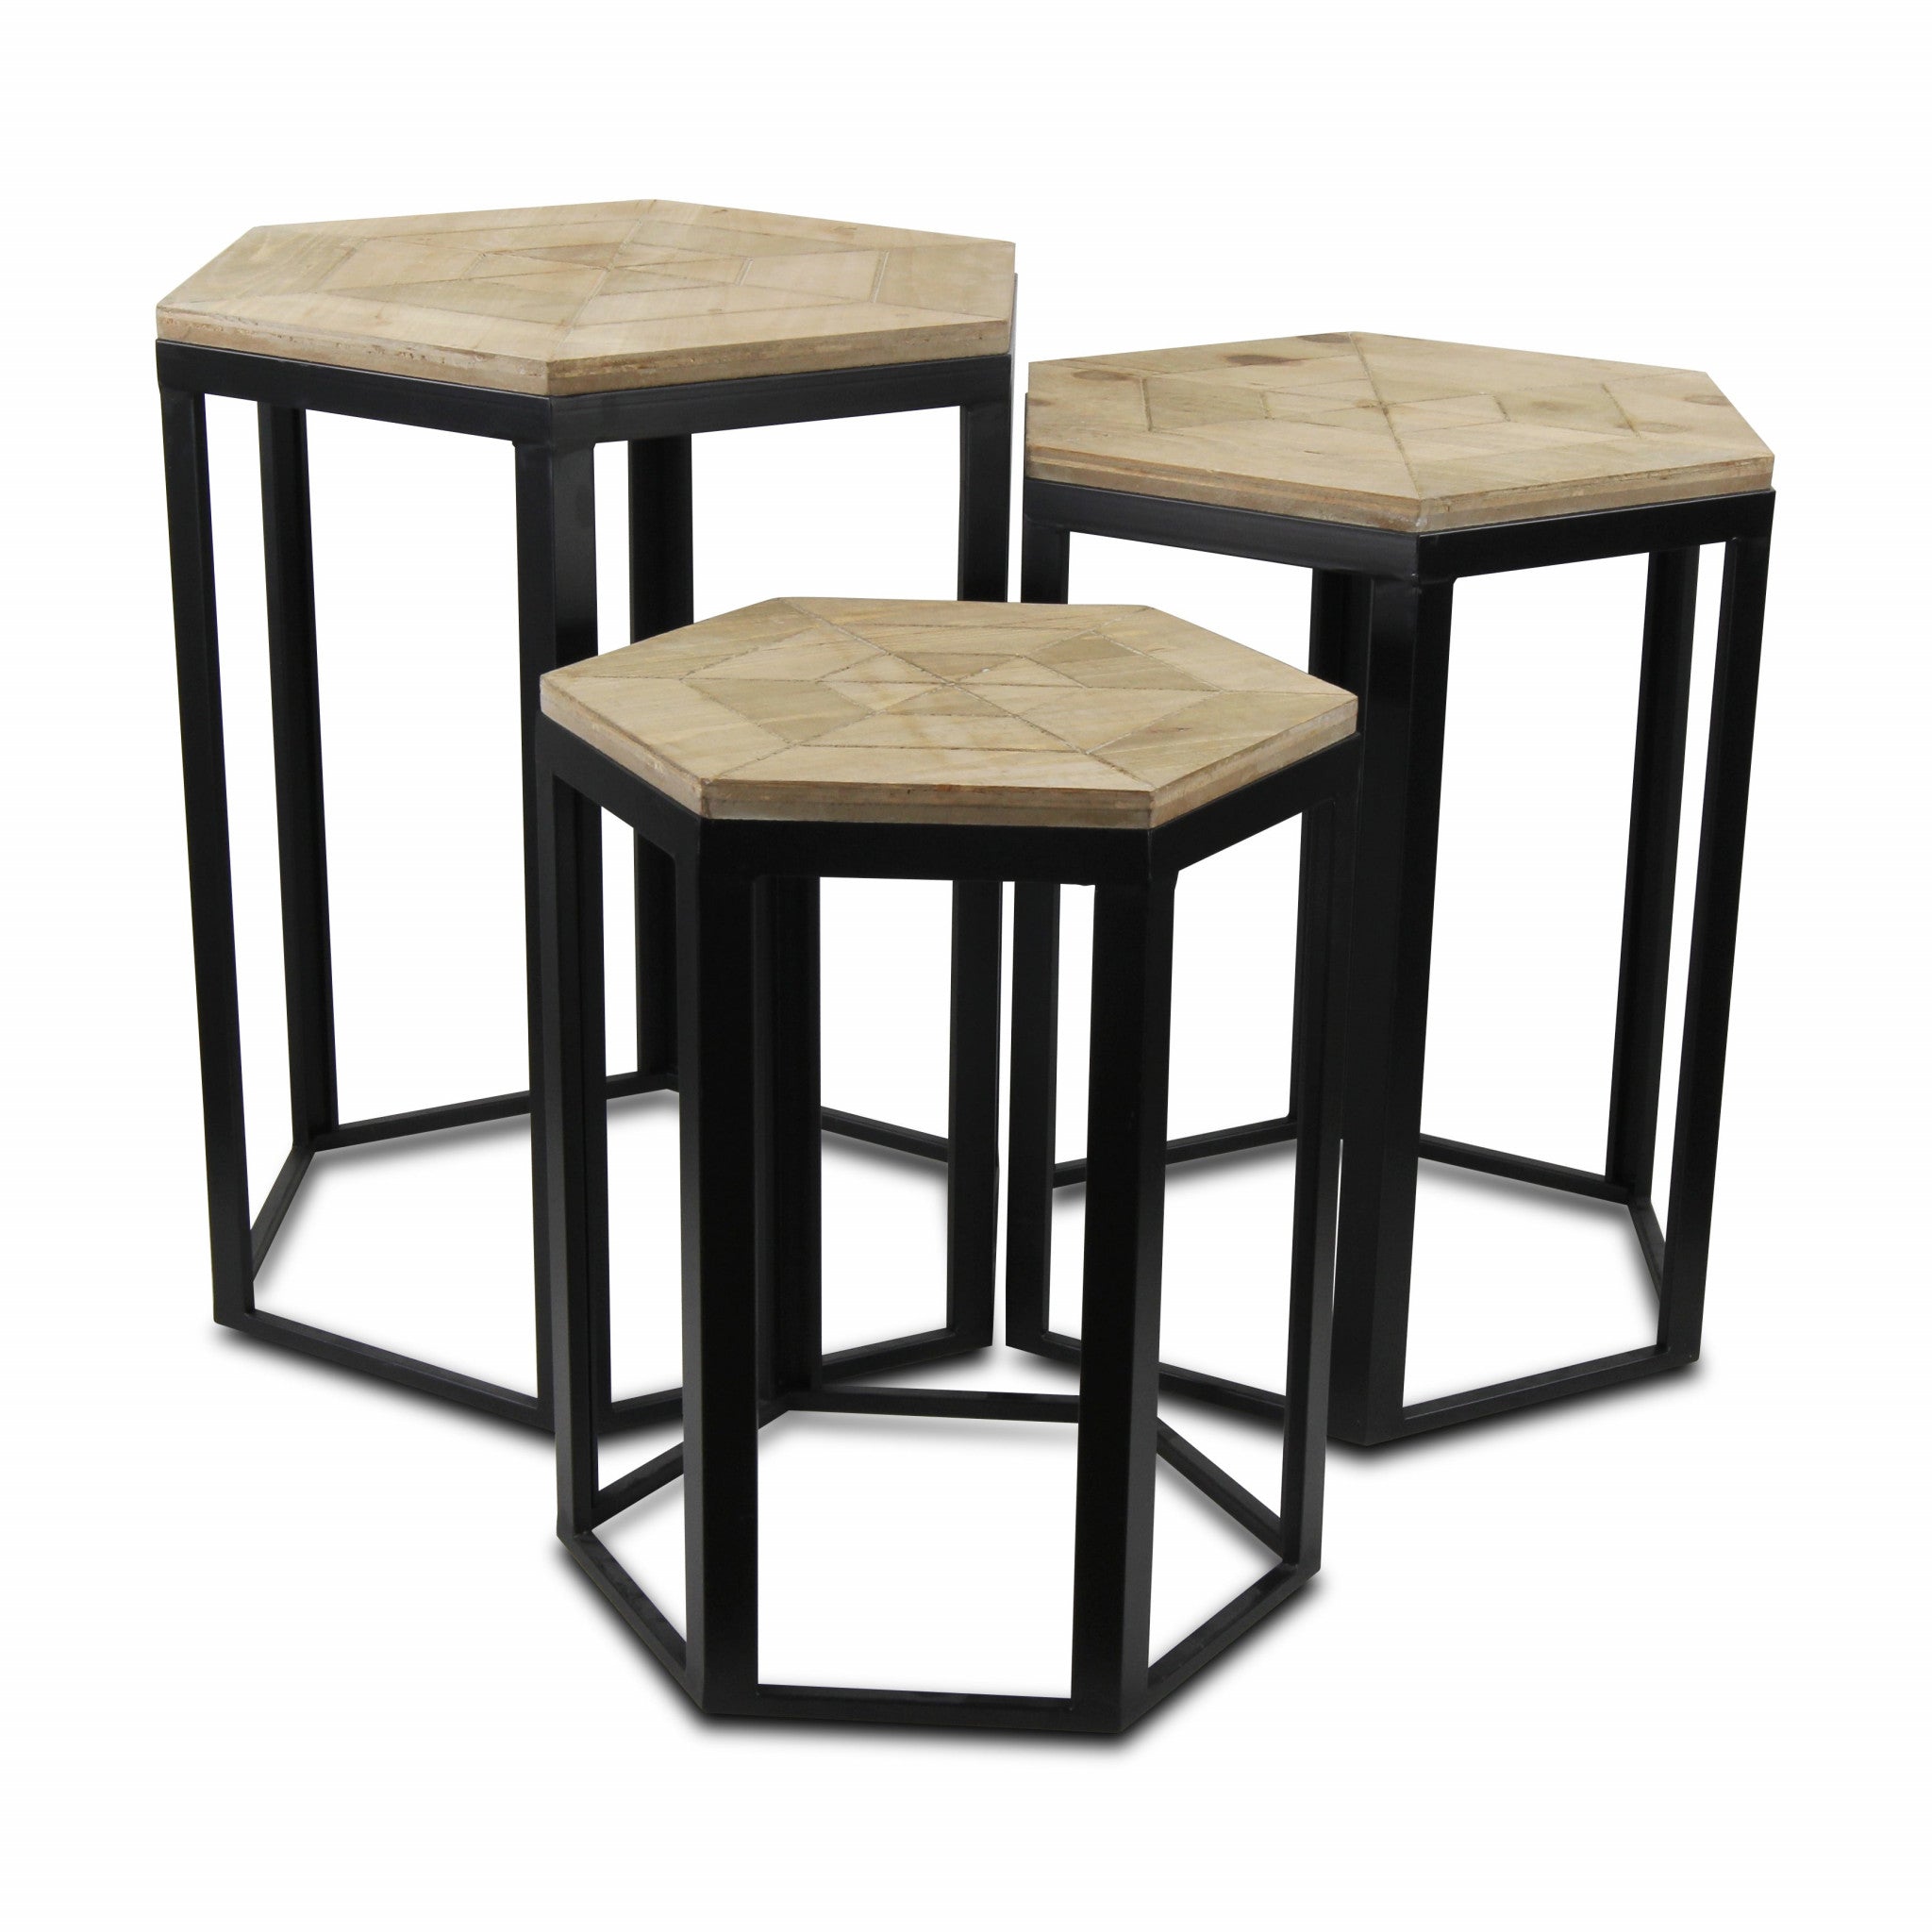 Set Of Three 25" Black And Brown Solid Wood And Steel Hexagon Nested Tables